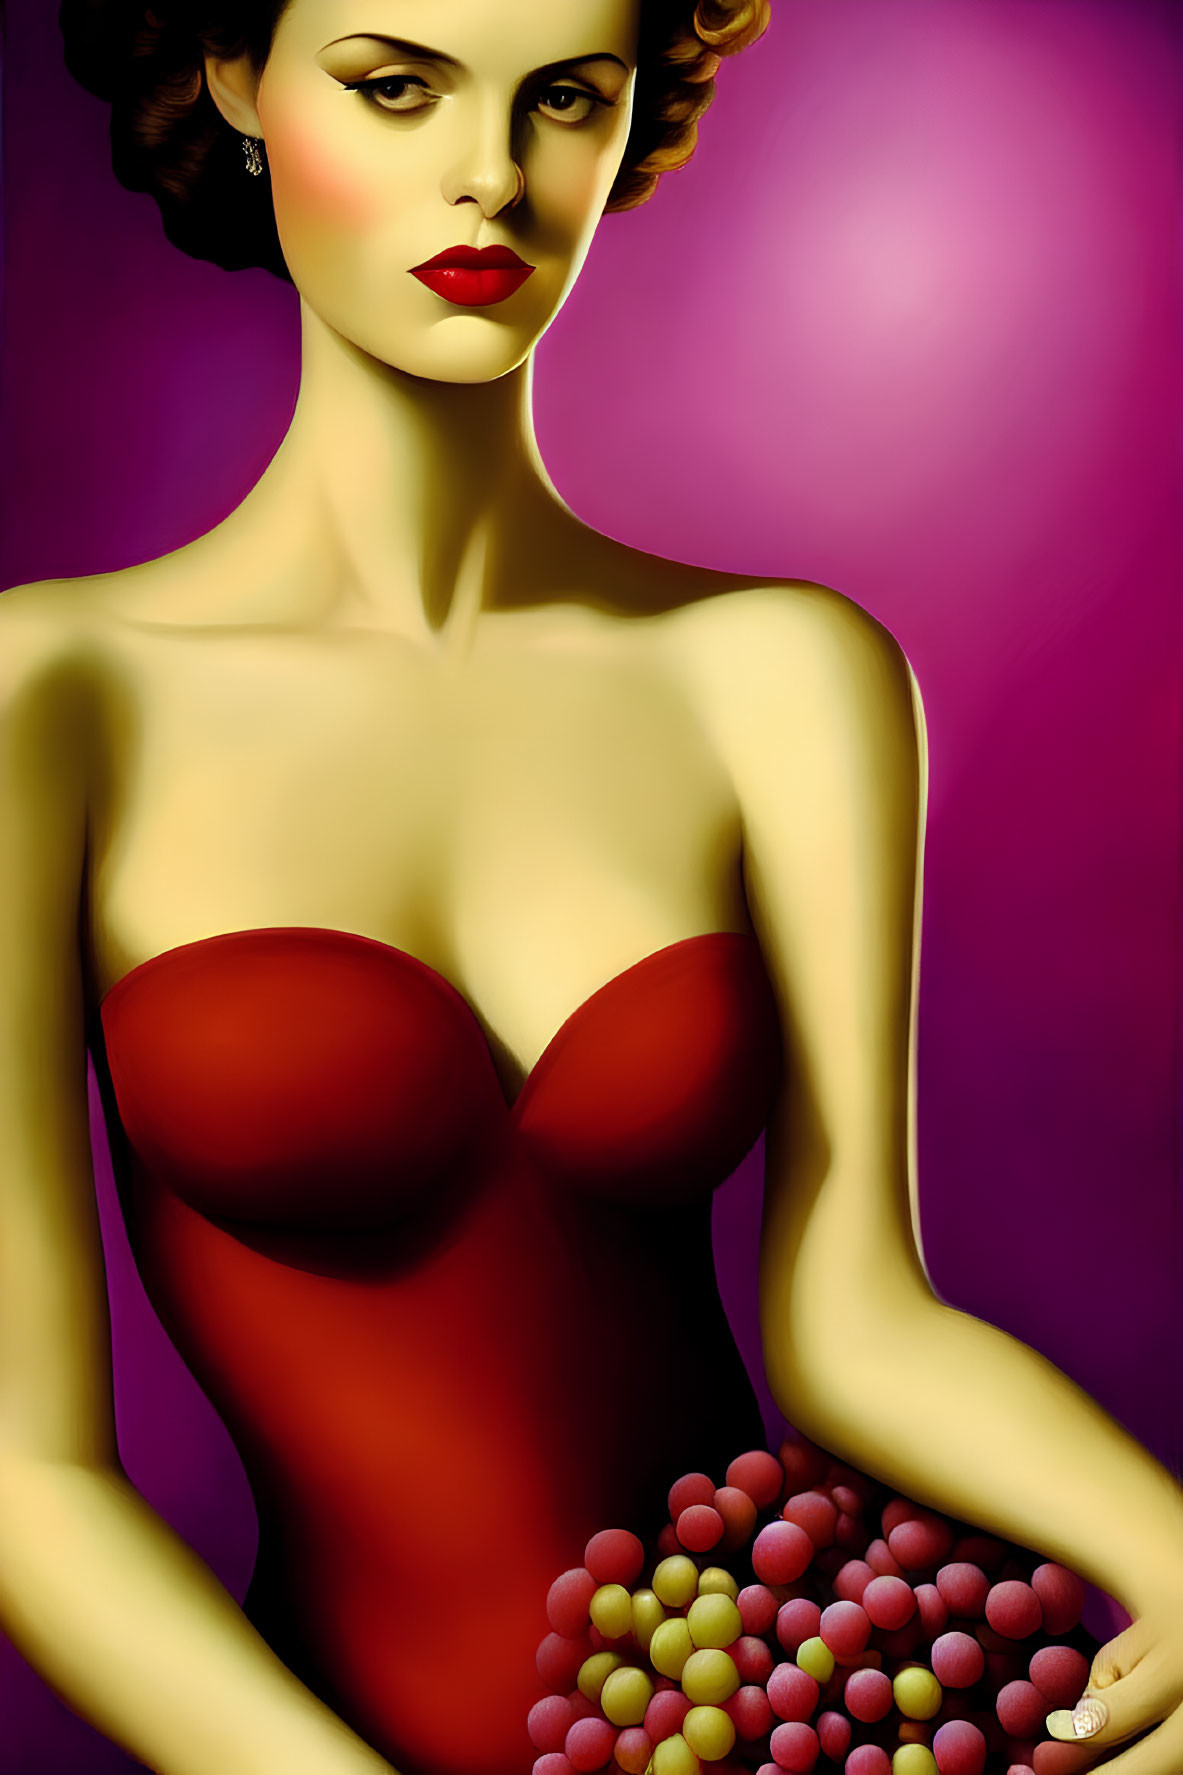 Stylized retro illustration of woman in red dress with grapes on purple background